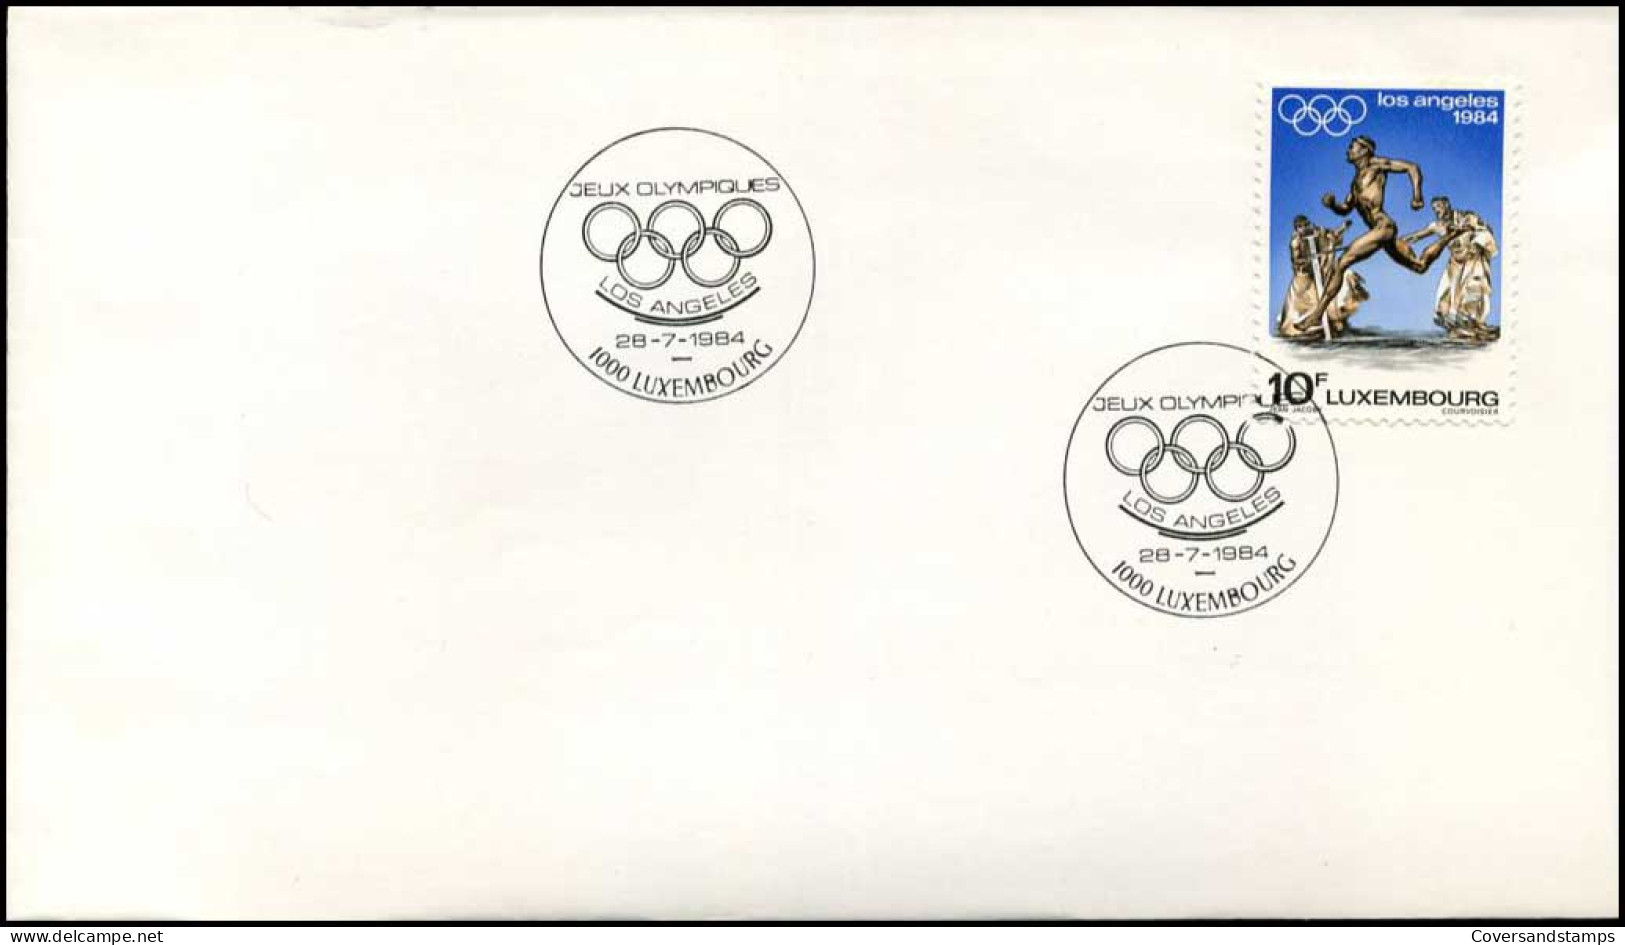 Luxembourg - FDC - Jeux Olympique Los Angeles 1984 - FDC